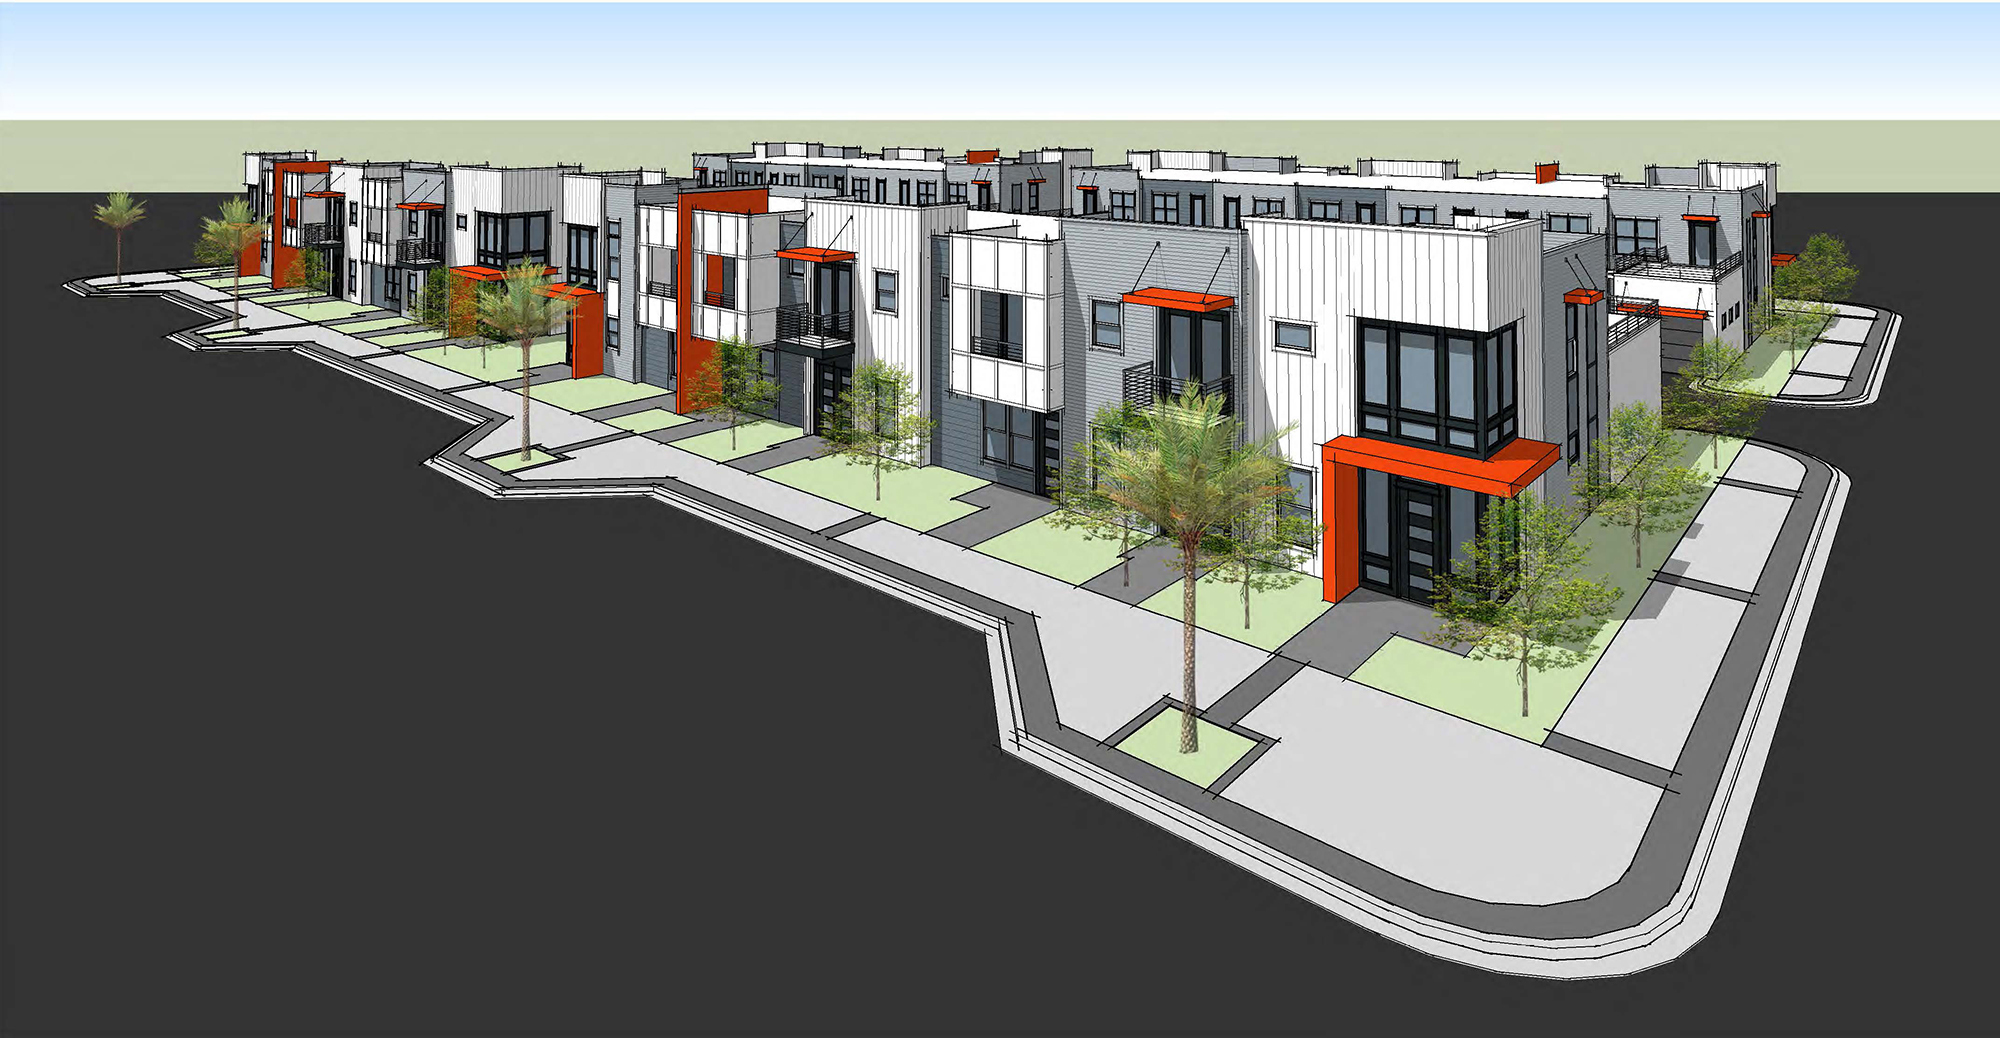 An artist's rendering of the Vestcor townhomes planned for LaVilla.